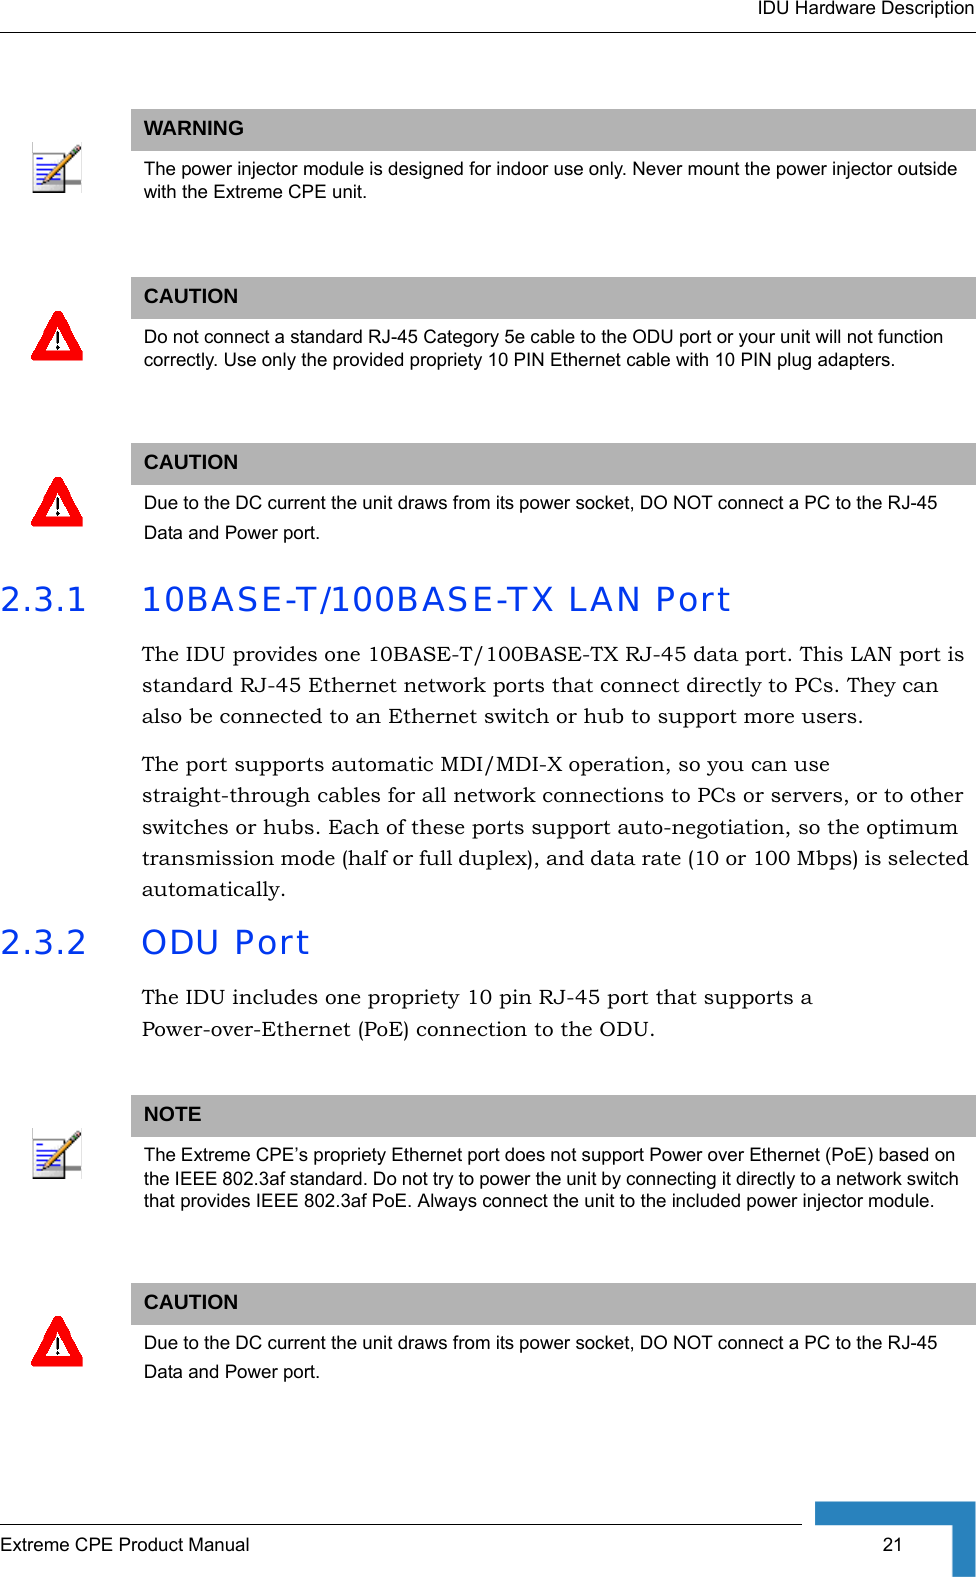 IDU Hardware DescriptionExtreme CPE Product Manual  21  2.3.1 10BASE-T/100BASE-TX LAN PortThe IDU provides one 10BASE-T/100BASE-TX RJ-45 data port. This LAN port is standard RJ-45 Ethernet network ports that connect directly to PCs. They can also be connected to an Ethernet switch or hub to support more users.The port supports automatic MDI/MDI-X operation, so you can use straight-through cables for all network connections to PCs or servers, or to other switches or hubs. Each of these ports support auto-negotiation, so the optimum transmission mode (half or full duplex), and data rate (10 or 100 Mbps) is selected automatically. 2.3.2 ODU PortThe IDU includes one propriety 10 pin RJ-45 port that supports a Power-over-Ethernet (PoE) connection to the ODU. WARNINGThe power injector module is designed for indoor use only. Never mount the power injector outside with the Extreme CPE unit.CAUTIONDo not connect a standard RJ-45 Category 5e cable to the ODU port or your unit will not function correctly. Use only the provided propriety 10 PIN Ethernet cable with 10 PIN plug adapters.CAUTIONDue to the DC current the unit draws from its power socket, DO NOT connect a PC to the RJ-45Data and Power port.NOTEThe Extreme CPE’s propriety Ethernet port does not support Power over Ethernet (PoE) based on the IEEE 802.3af standard. Do not try to power the unit by connecting it directly to a network switch that provides IEEE 802.3af PoE. Always connect the unit to the included power injector module.CAUTIONDue to the DC current the unit draws from its power socket, DO NOT connect a PC to the RJ-45Data and Power port.